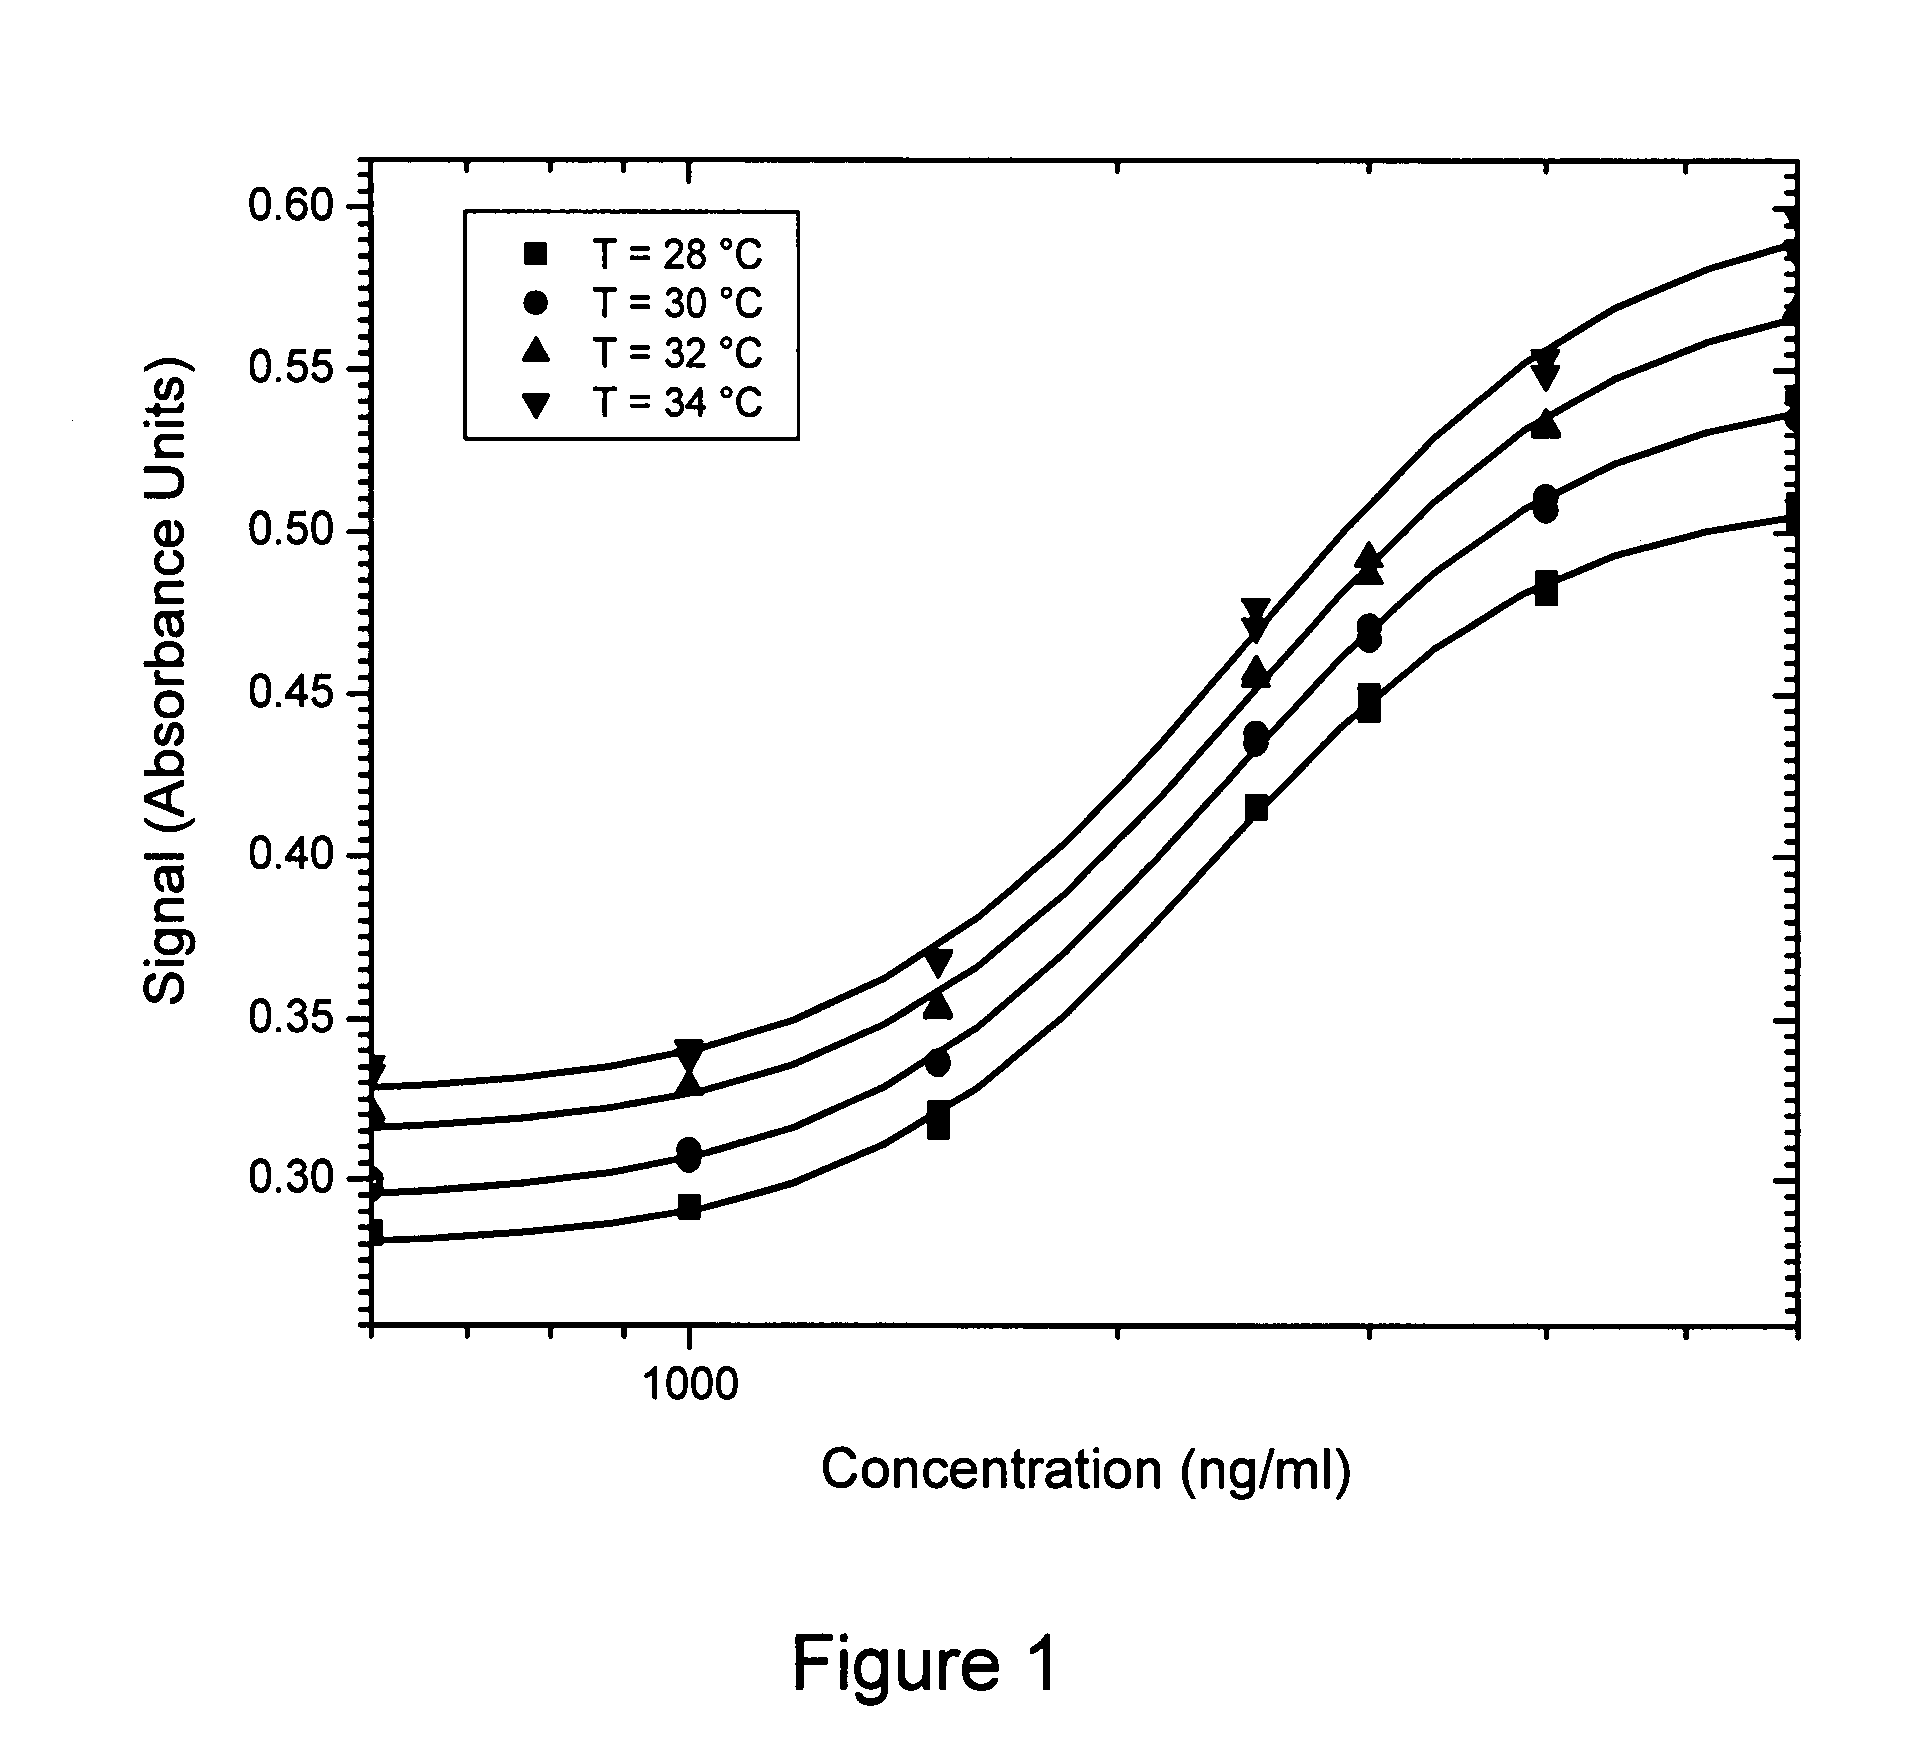 Method of compensation of dose-response curve of an essay for sensitivity to perturbing variables